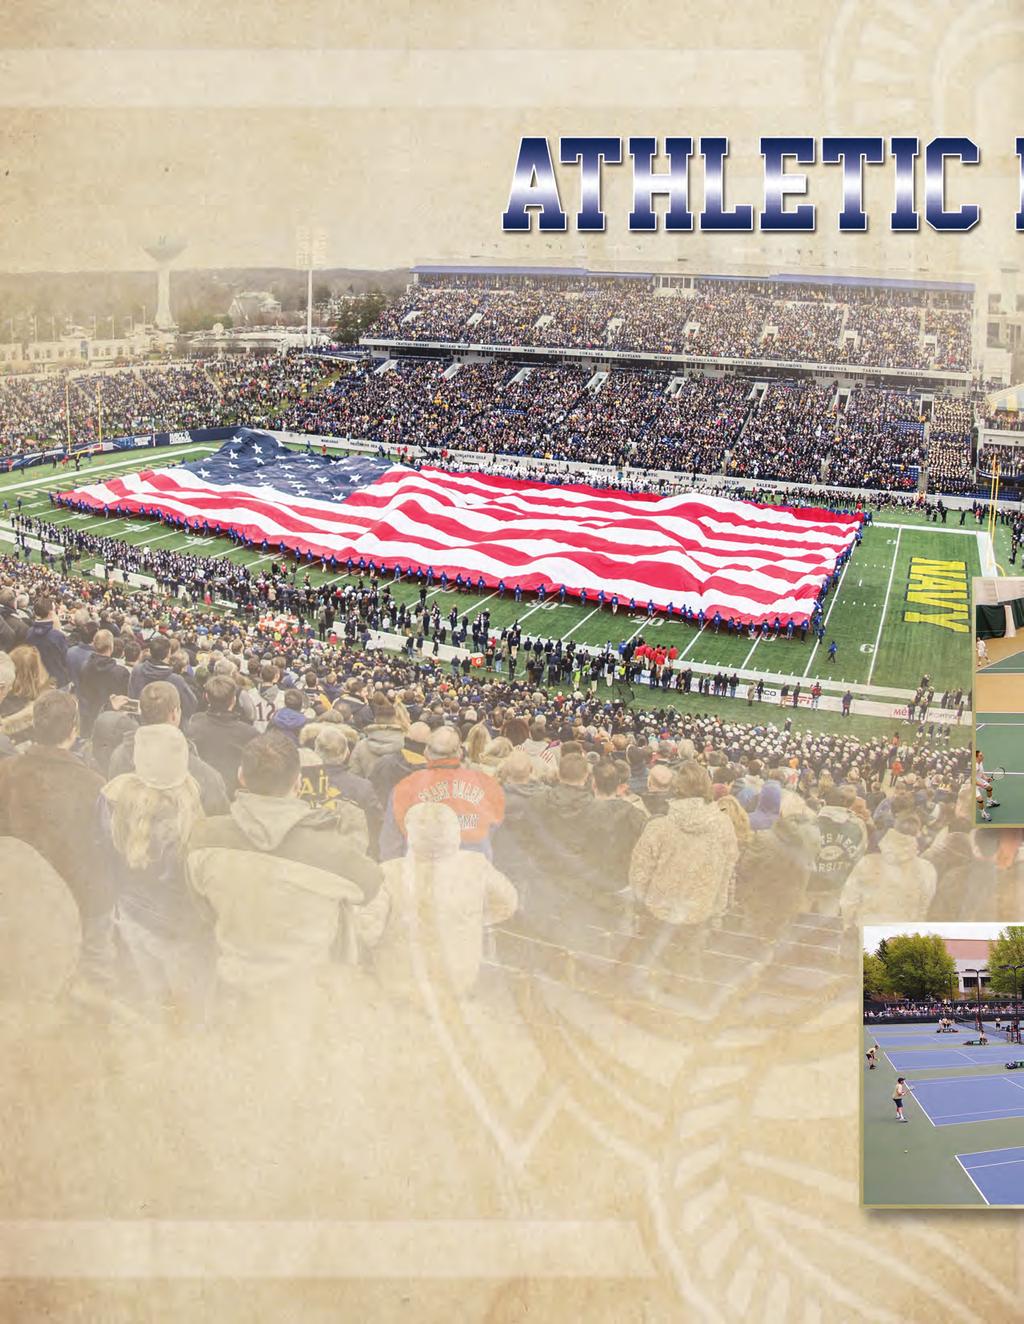 2017-18 NAVY ATLETICS p NAVY-MARINE CORPS MEMORIAL STADIUM ome of Navy football, men s and women s lacrosse, and sprint football.